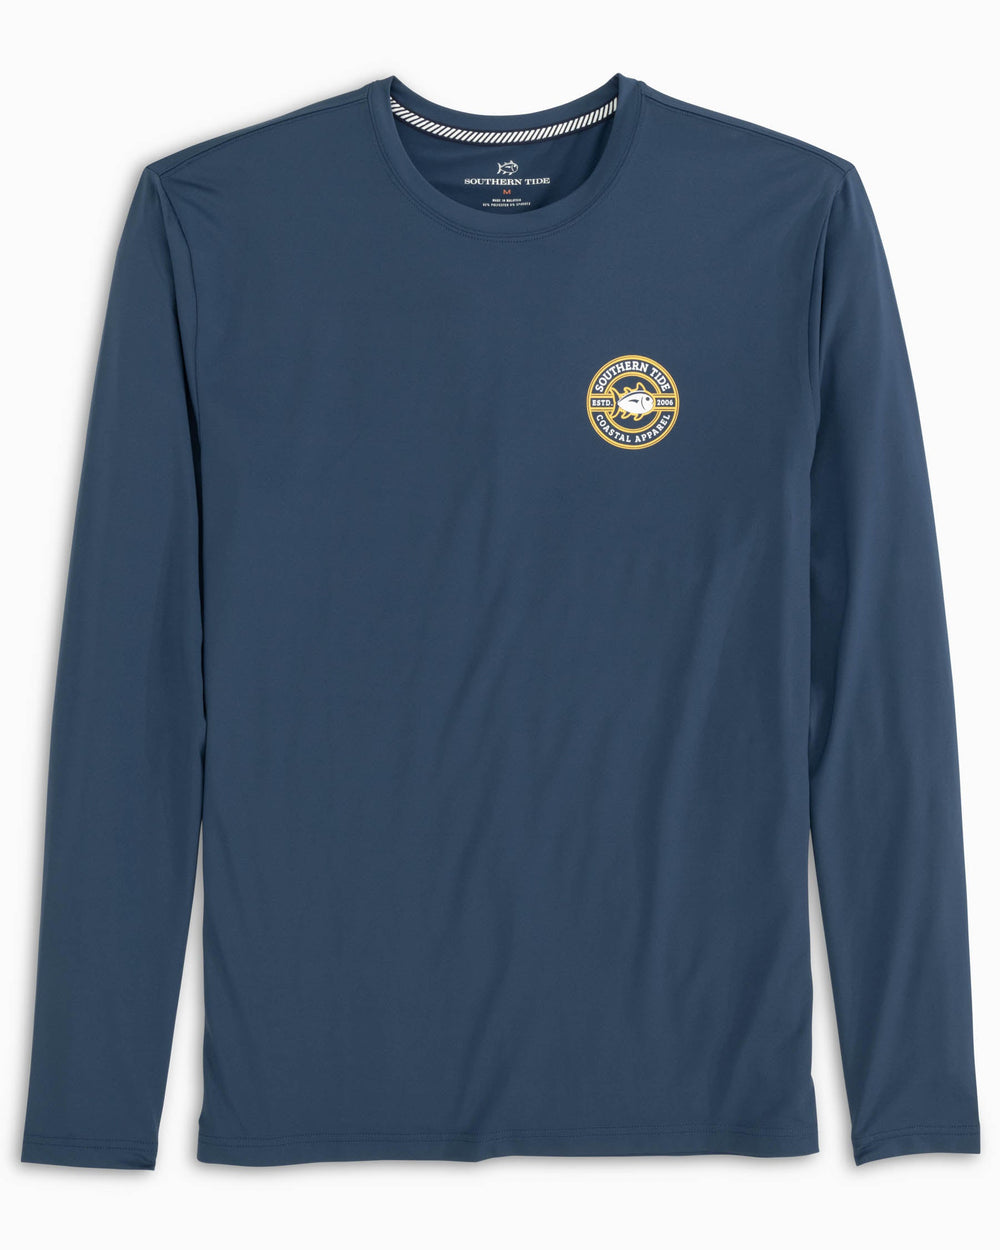 The front view of the Antique Driving Helmet Performance Long Sleeve T-Shirt by Southern Tide - Dark Denim